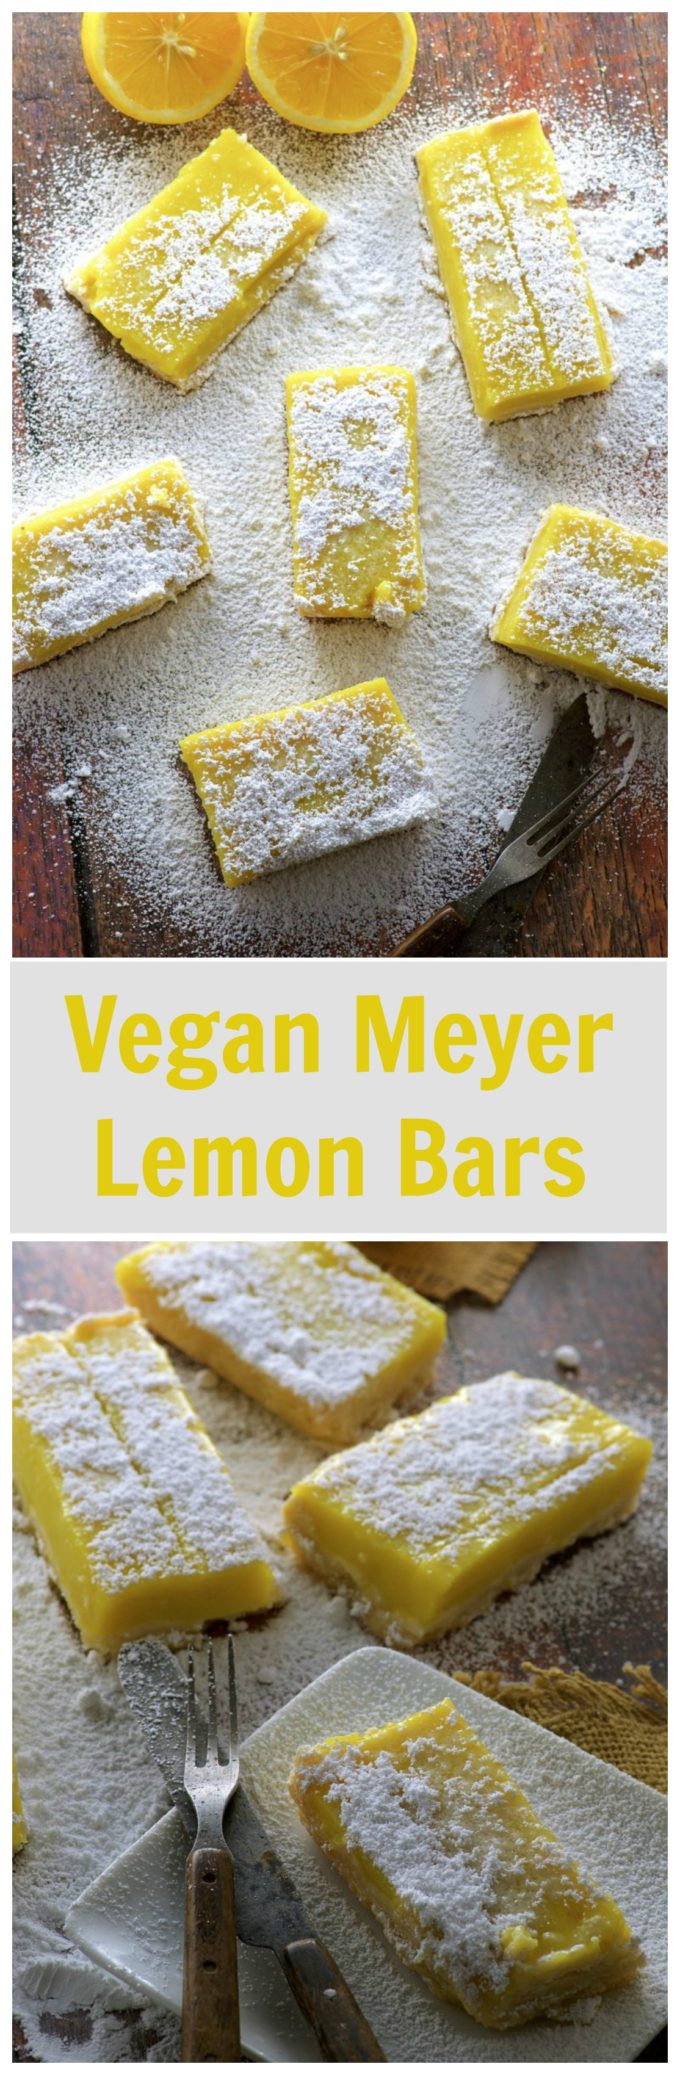 Yes, we have these awesome Vegan Meyer Lemon Bars for you today but... could you help us out with an issue we're dealing with?